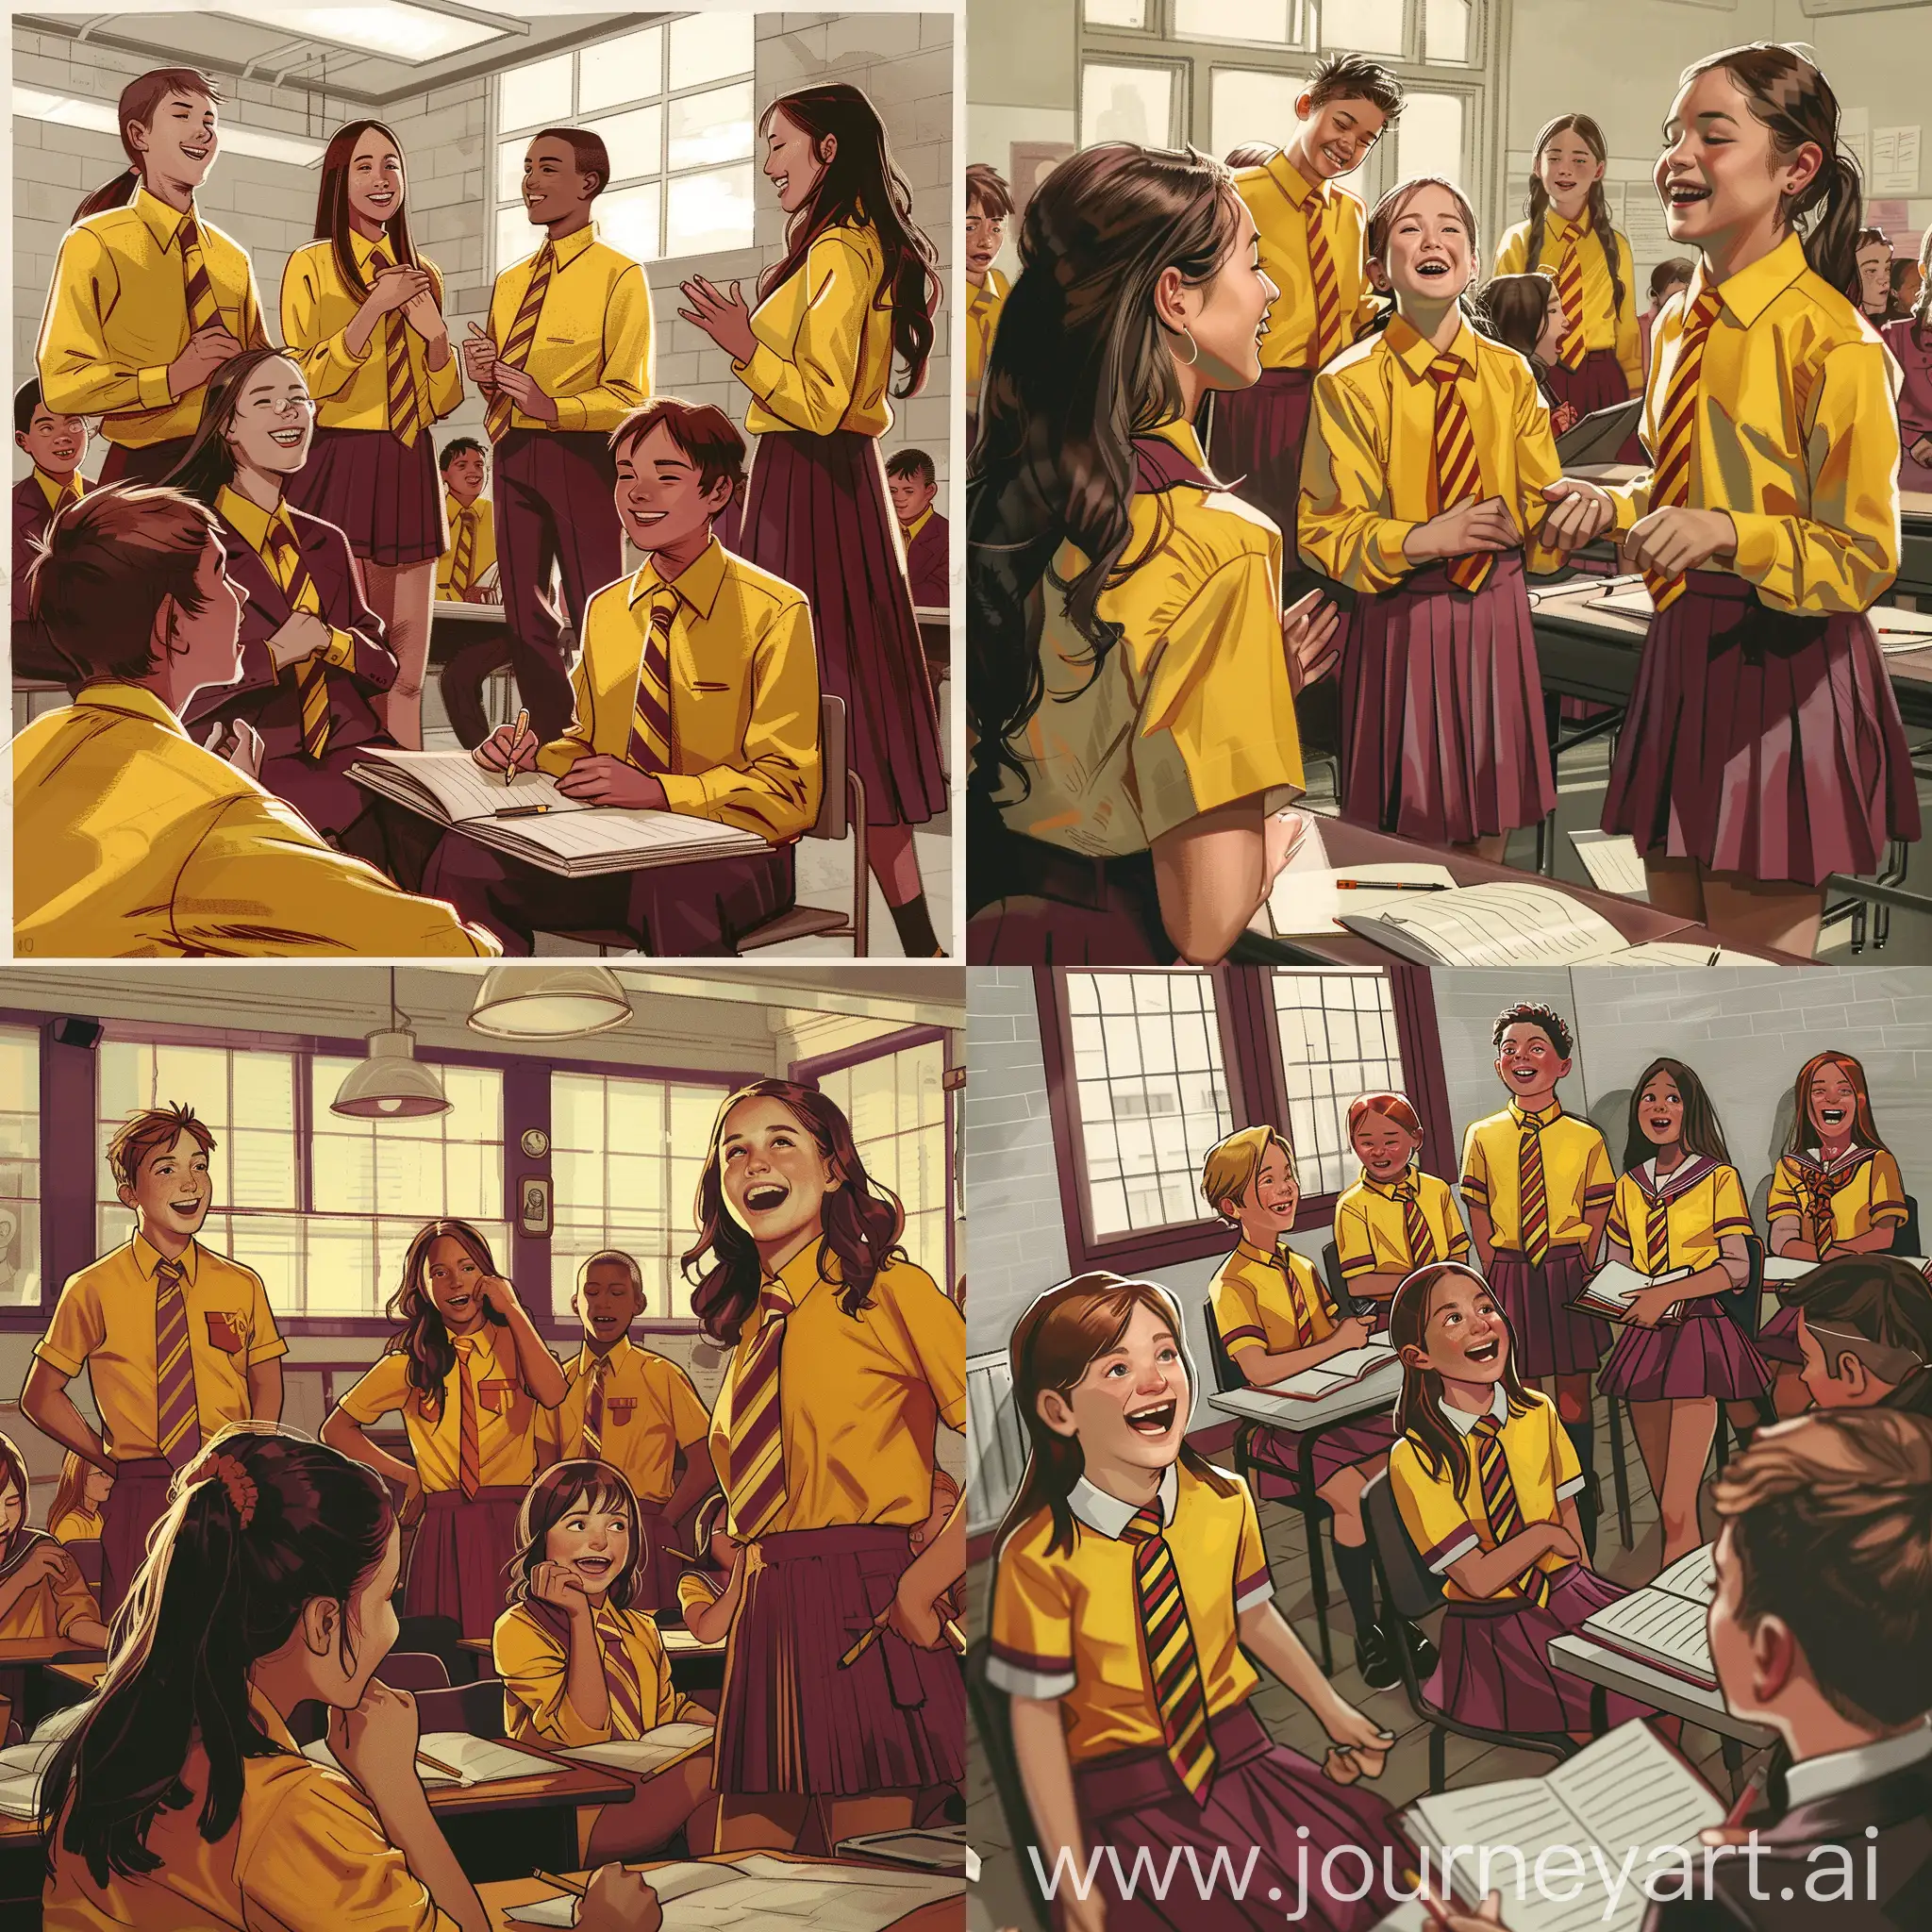 Vibrant-Classroom-Scene-Students-Studying-Singing-and-Drawing